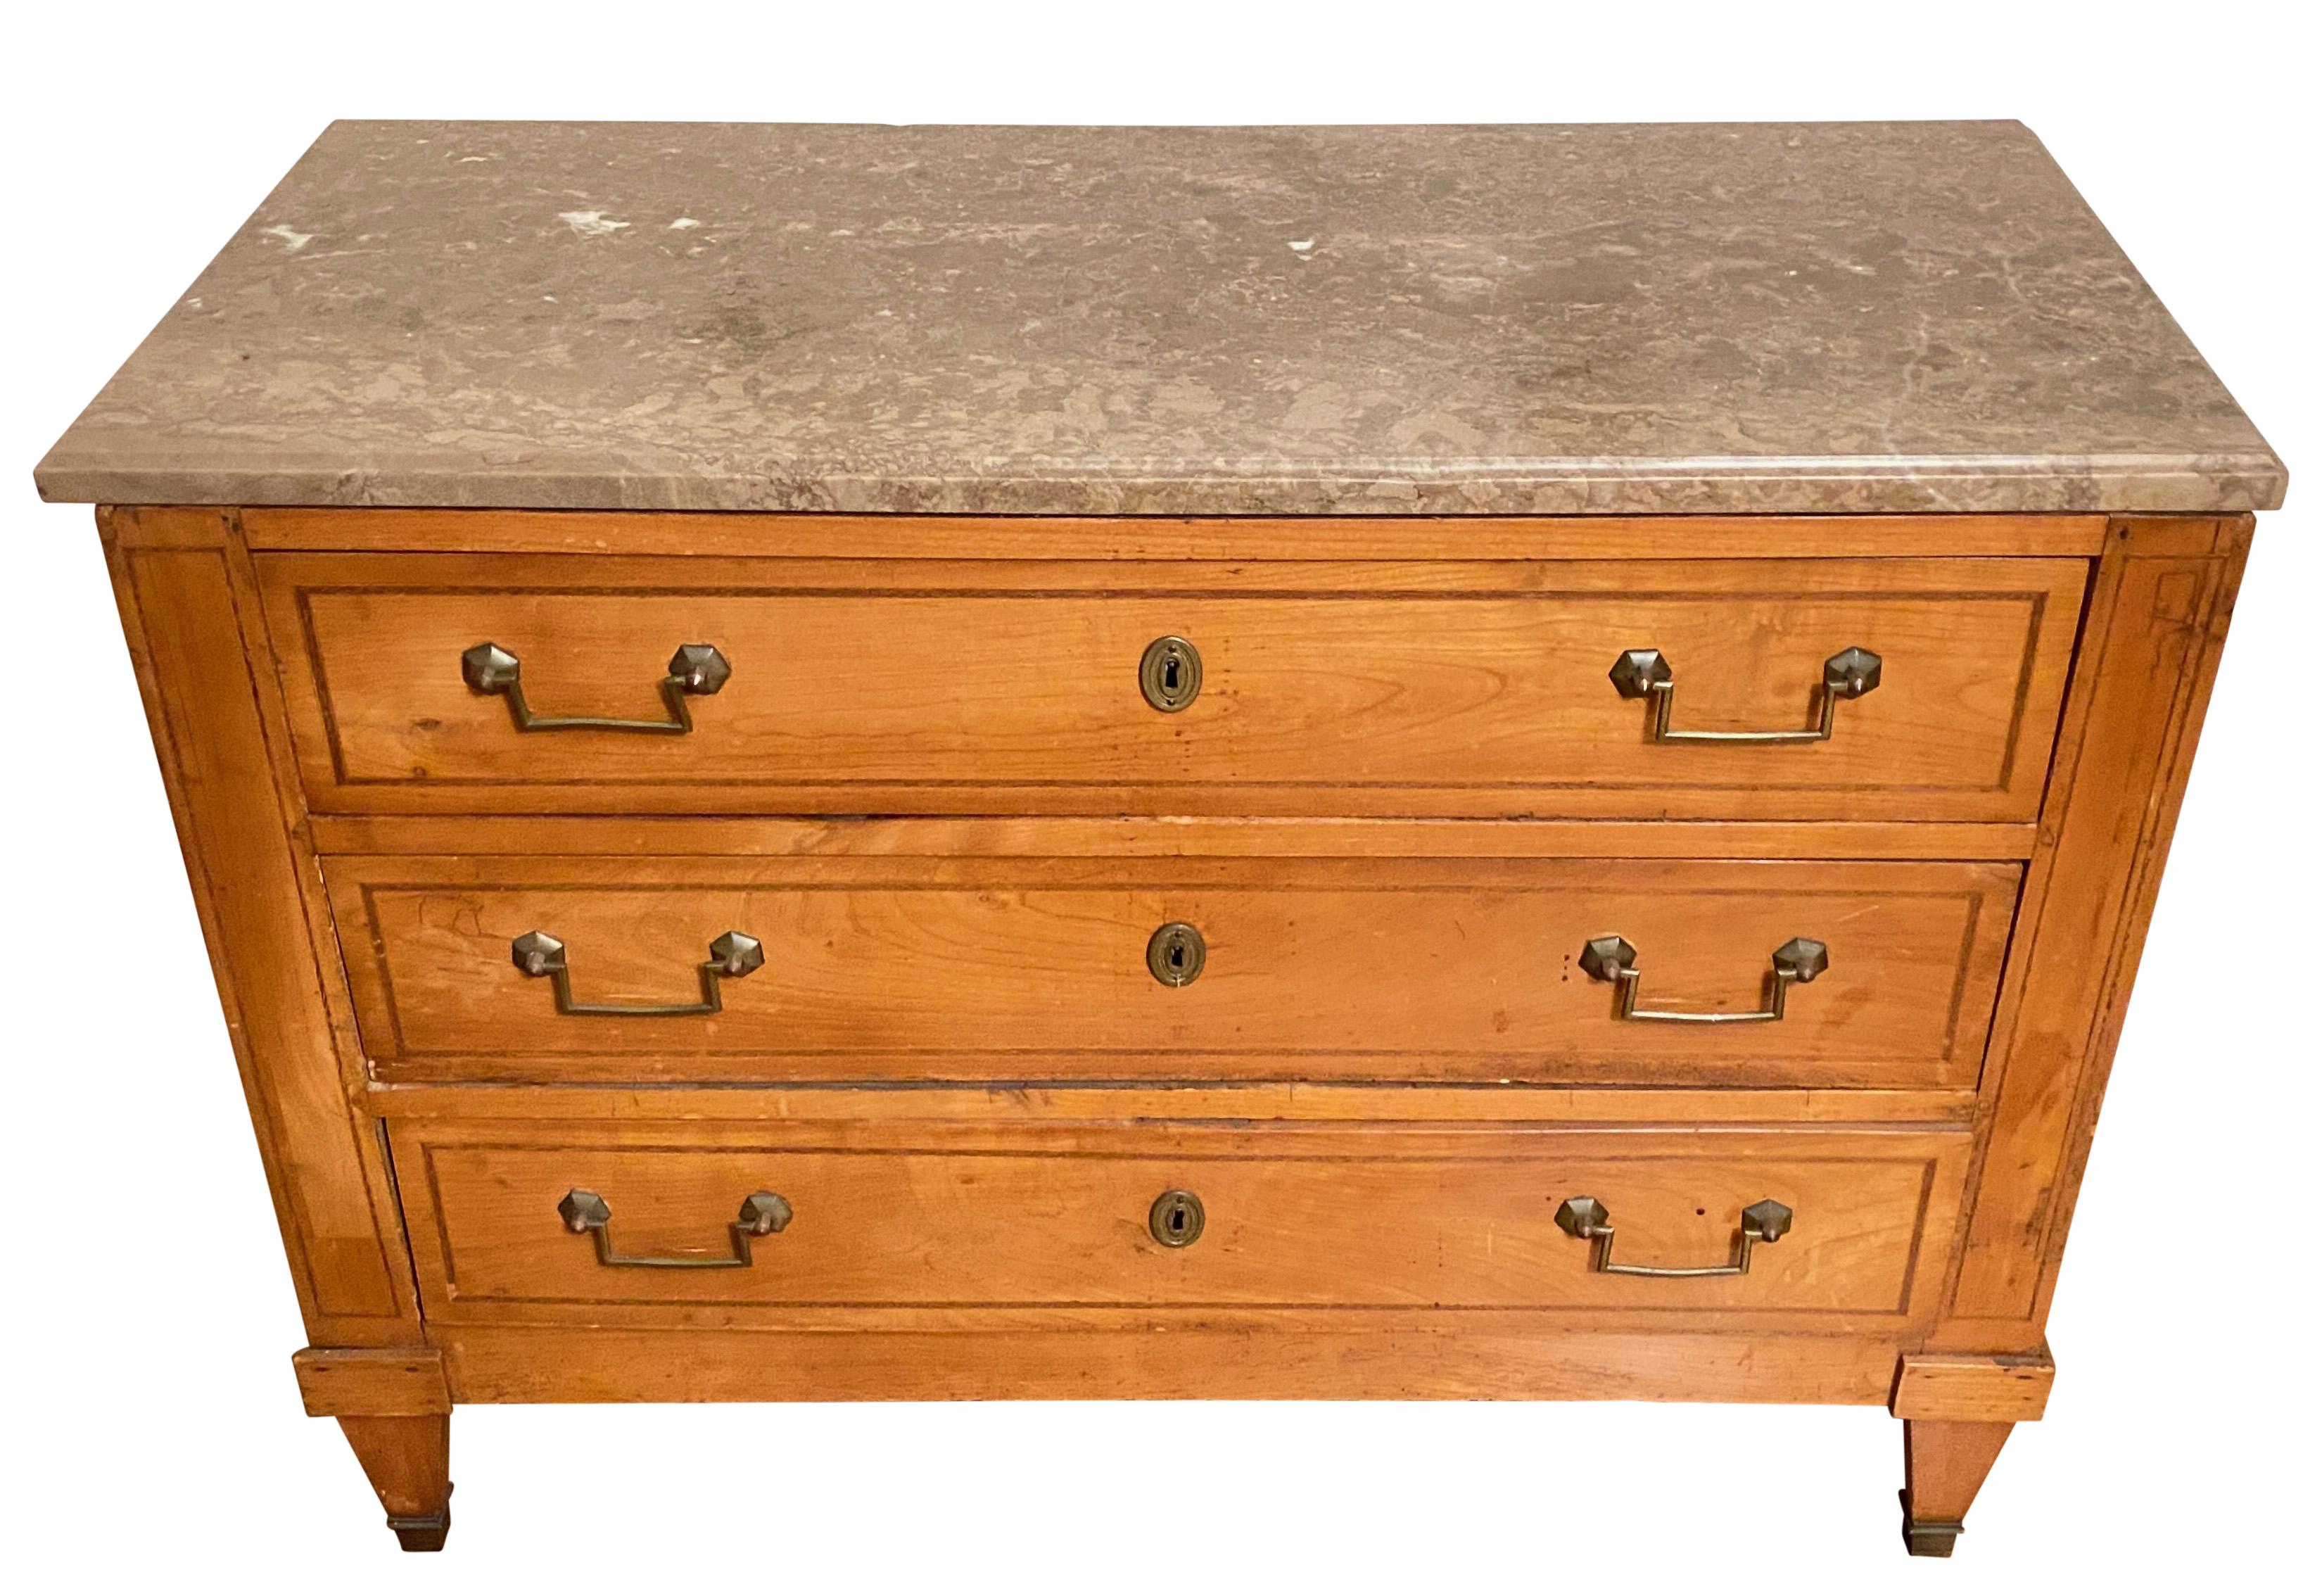 A fine 18th century French Louis XVI cherry wood commode or chest of drawers. Having three drawers with original brass hardware and original marble top, and walnut banding detail. Nice proportions with classic style. 
Please note on either side